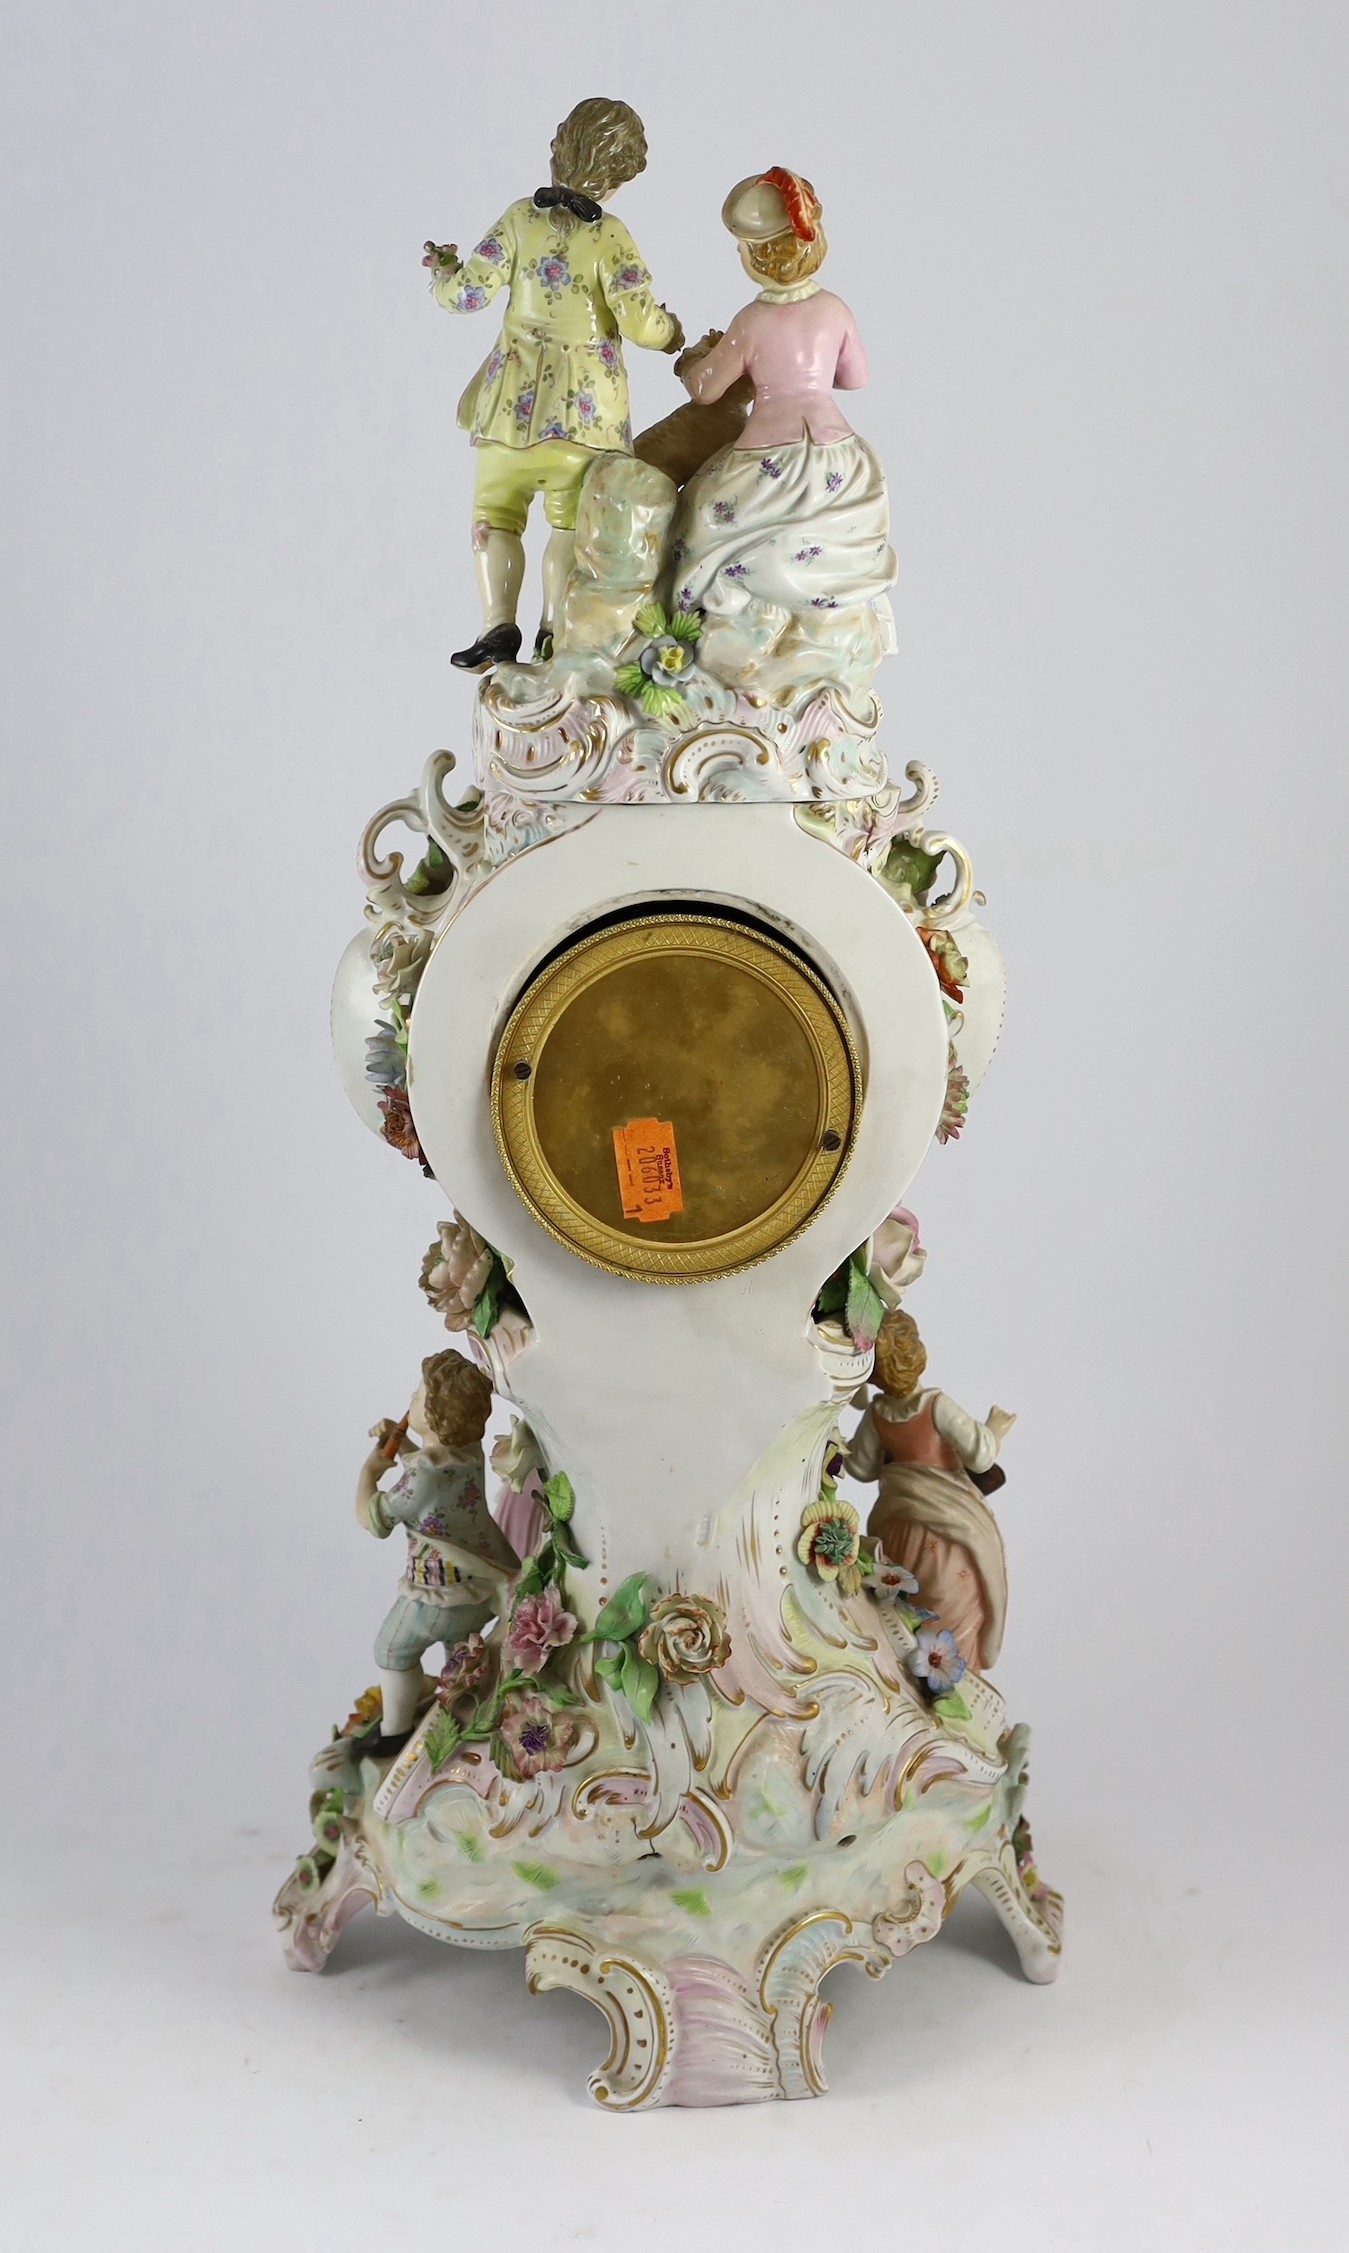 An impressive German porcelain floral encrusted figural mantel clock, late 19th century, Total height 65 cm